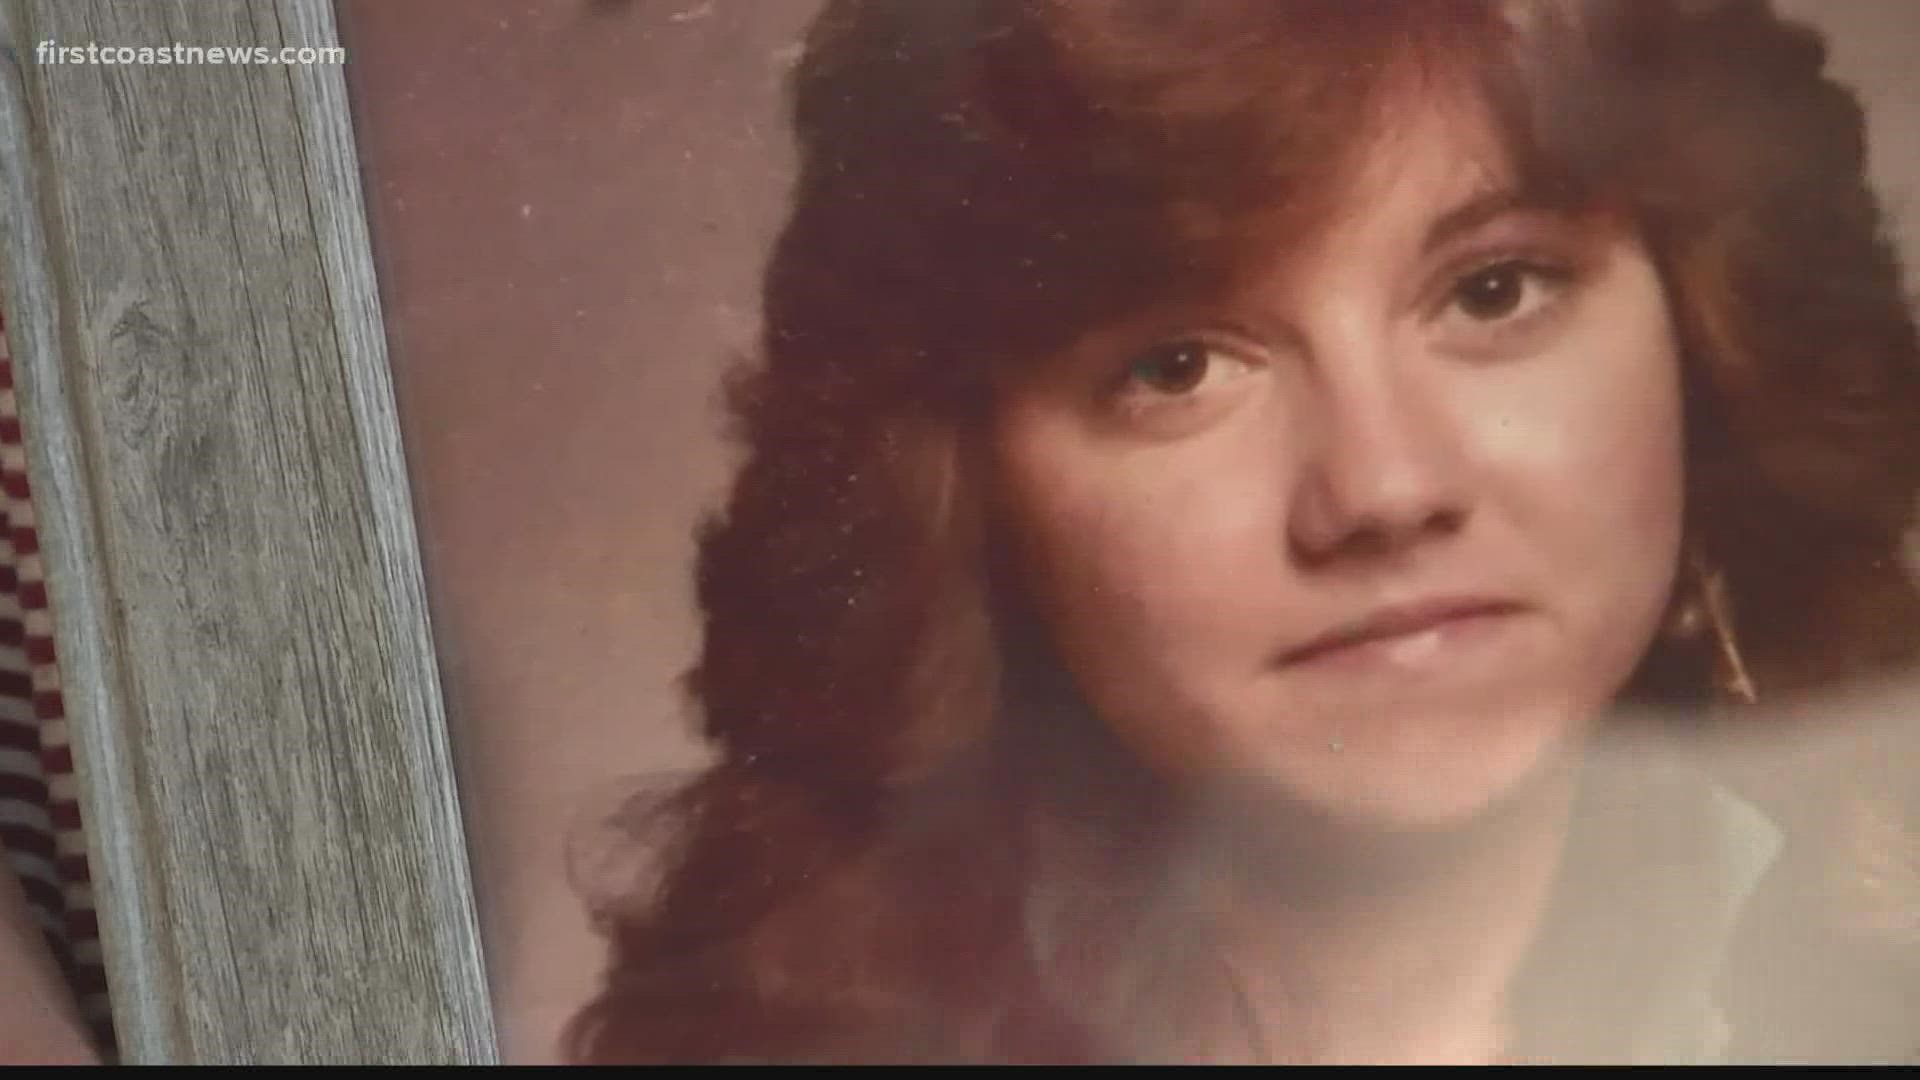 An arrest in the 1985 murder of an Avondale 17-year-old comes after police say DNA matched that of a man serving a life sentence for sex crimes.